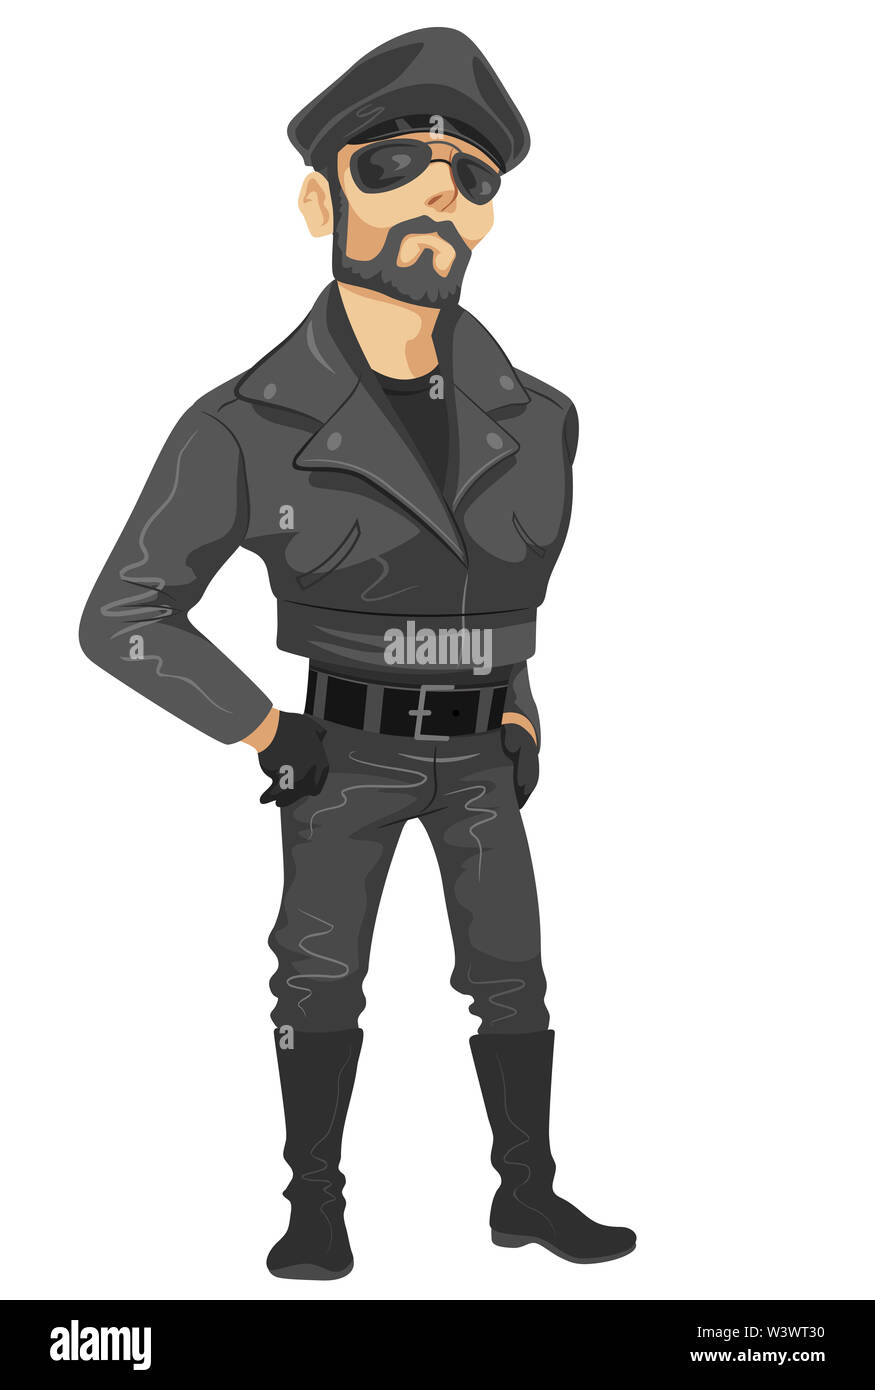 Illustration of a Man Wearing Leather All Over from Hat, Jacket, Belt, Pants to Boots Stock Photo